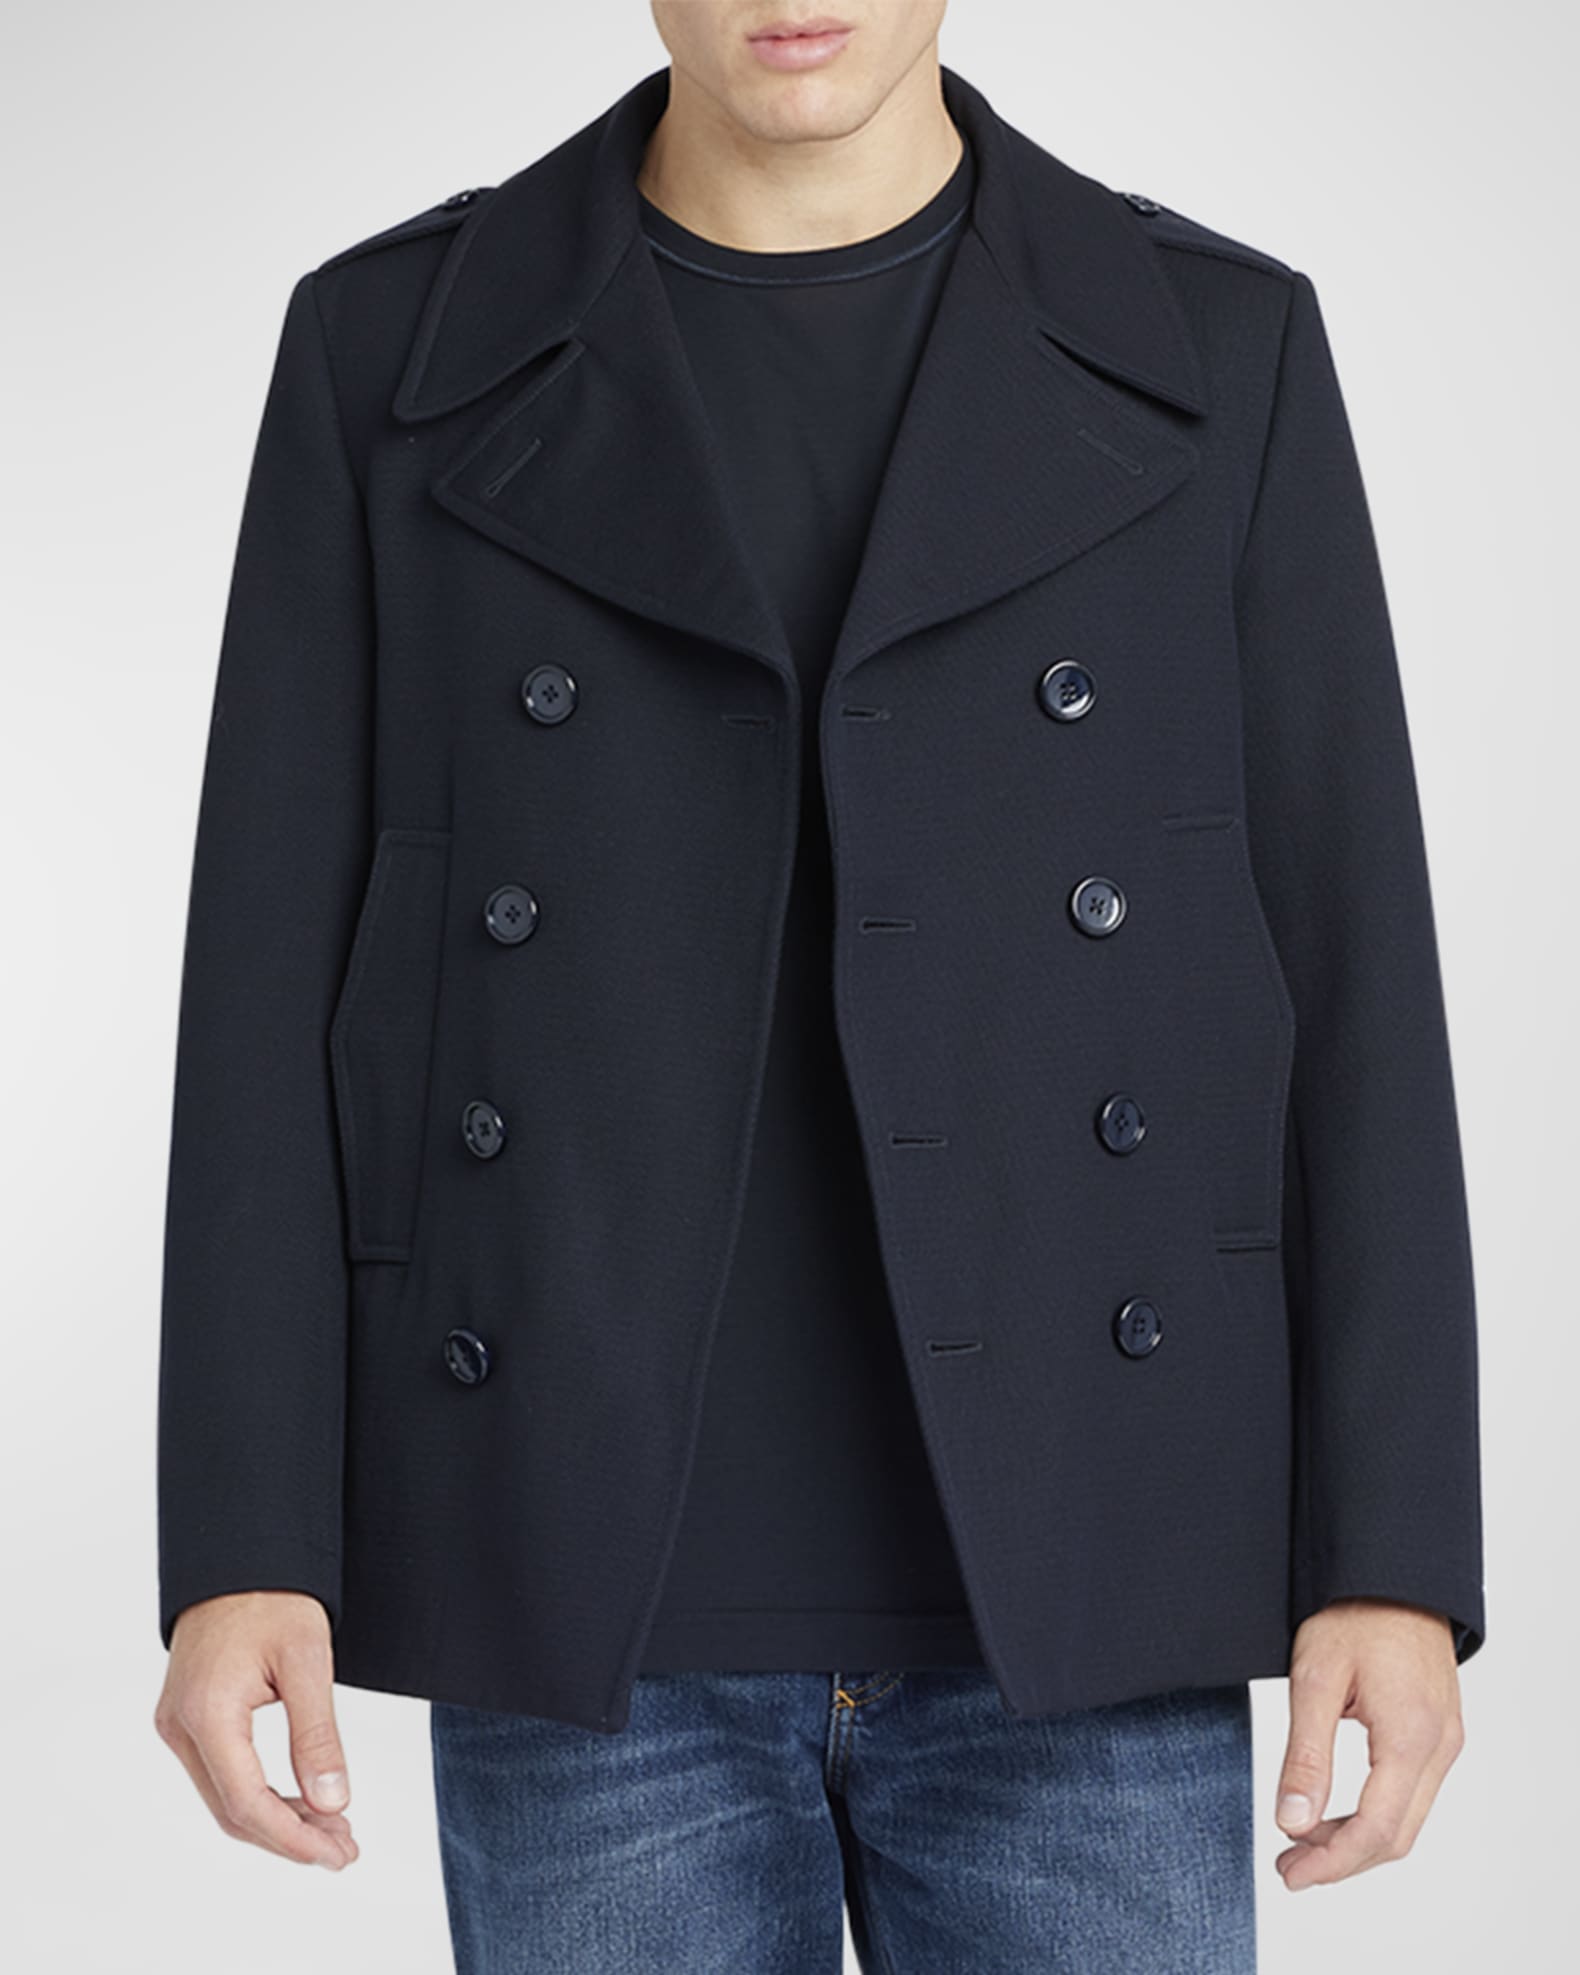 Dolce&Gabbana Men's Solid Double-Breasted Peacoat | Neiman Marcus